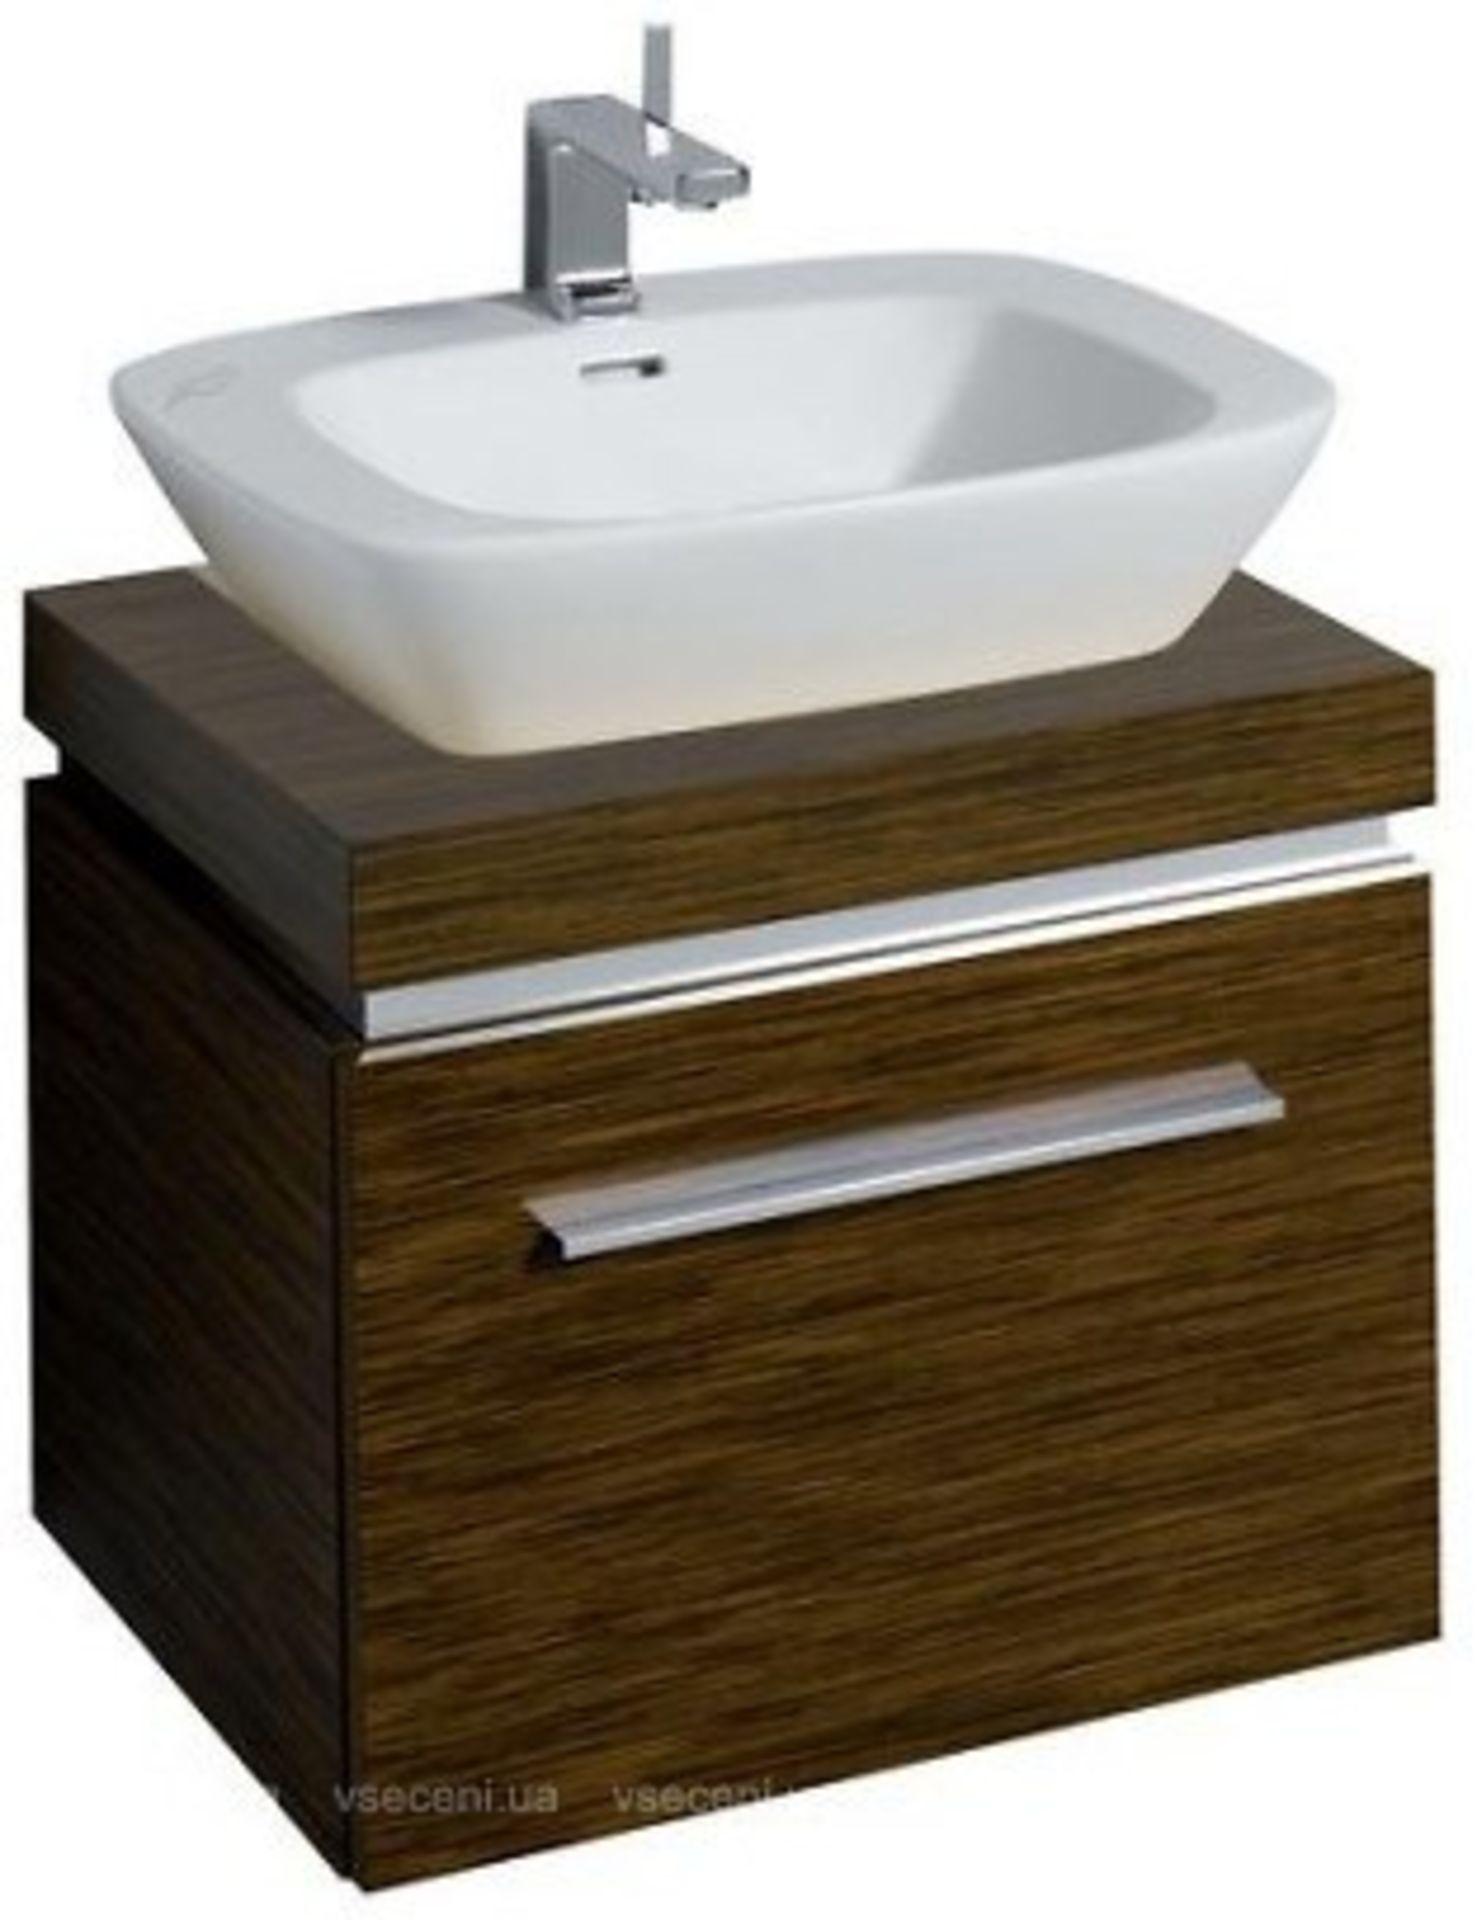 (LV122) Keramag 600mm Silk Walnut Vanity unit. RRP £818.99.Comes complete with basin. The Sil...